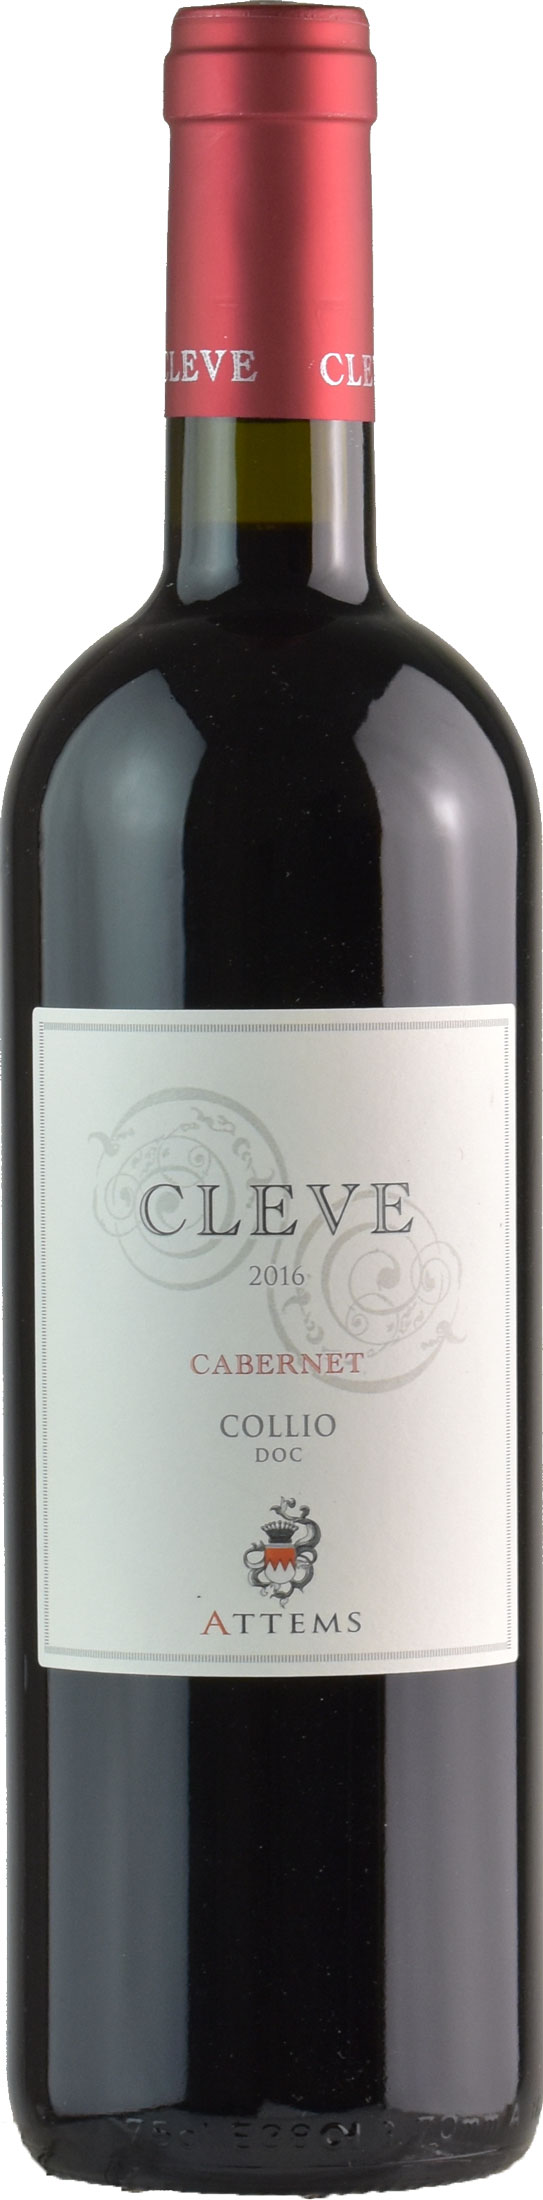 Attems (Frescobaldi) Attems Cleve Cabernet 2016